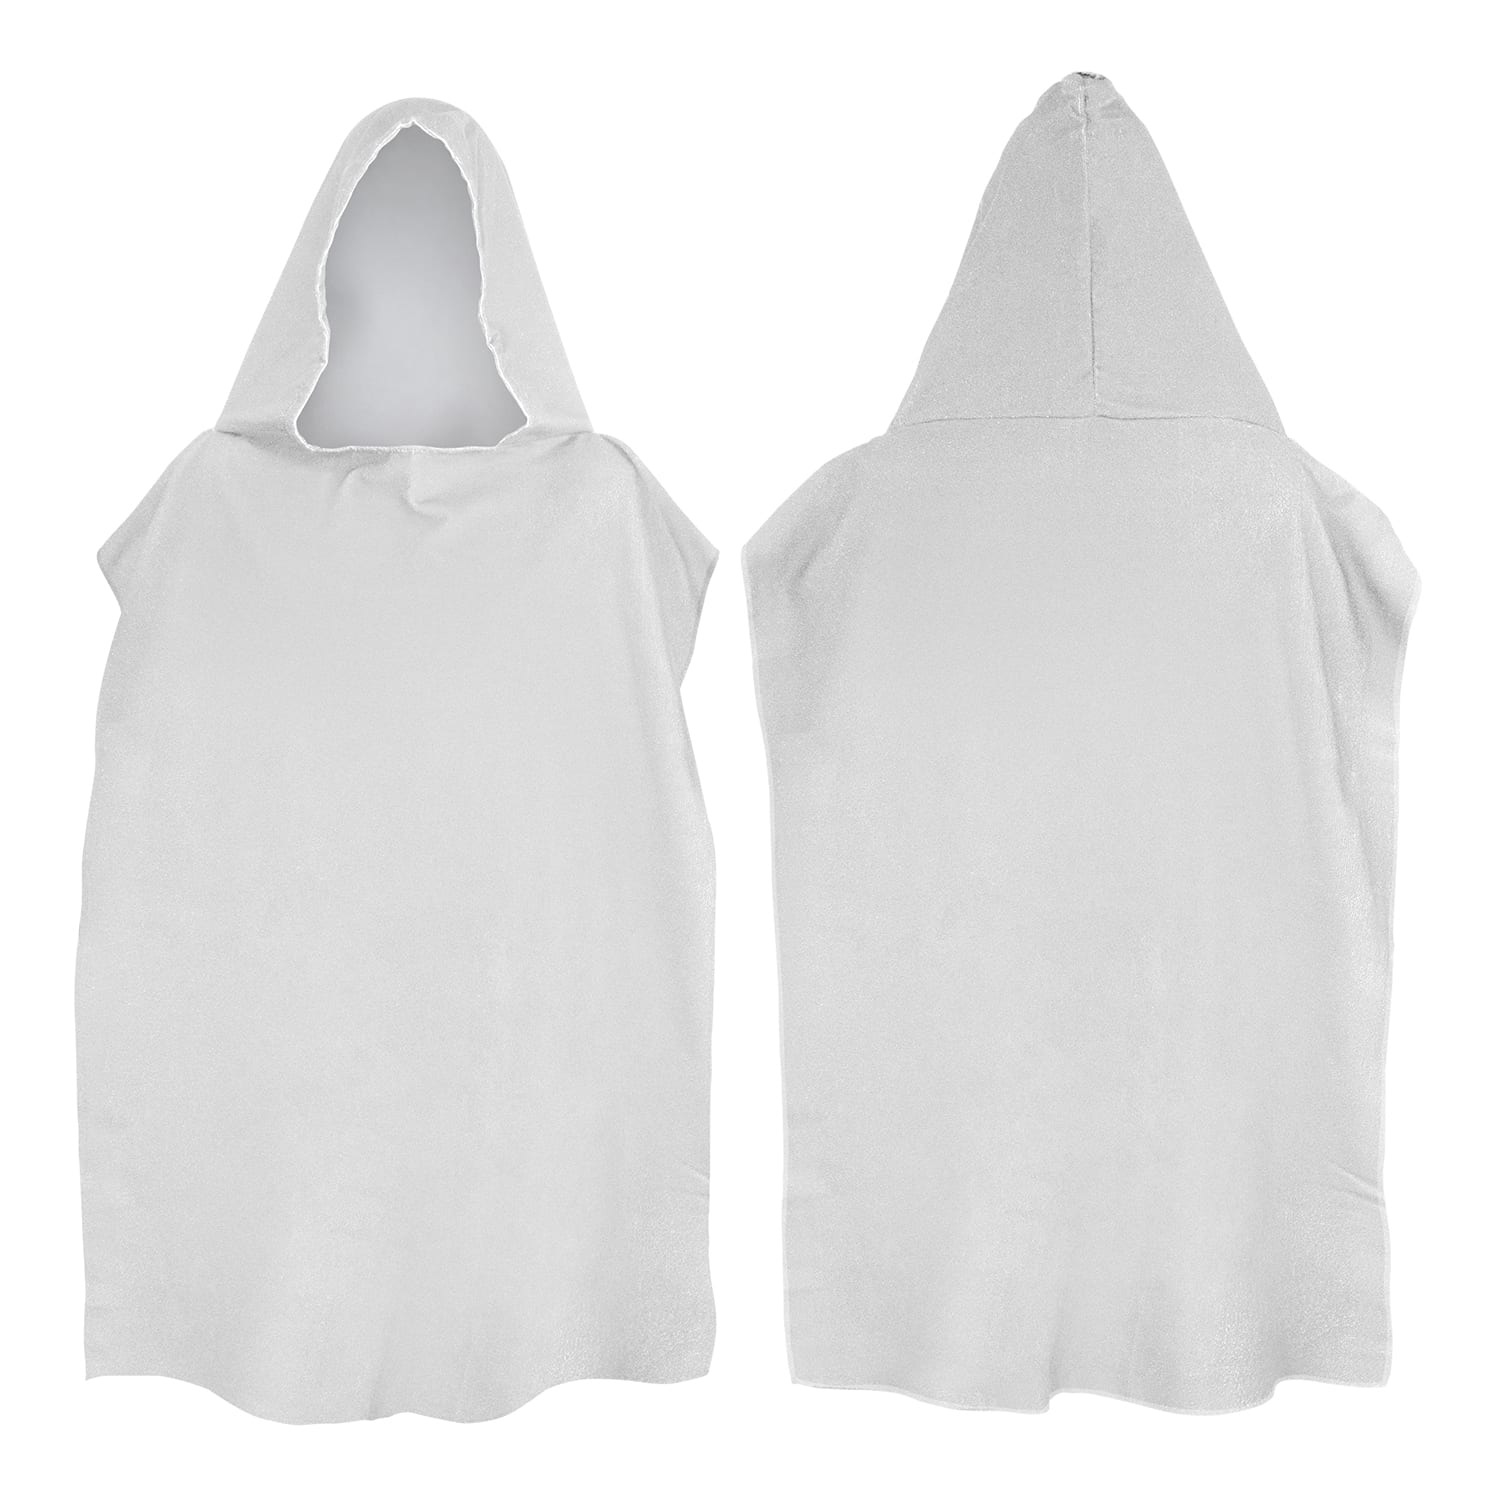 Camping & Outdoors Adult Hooded Towel Adult